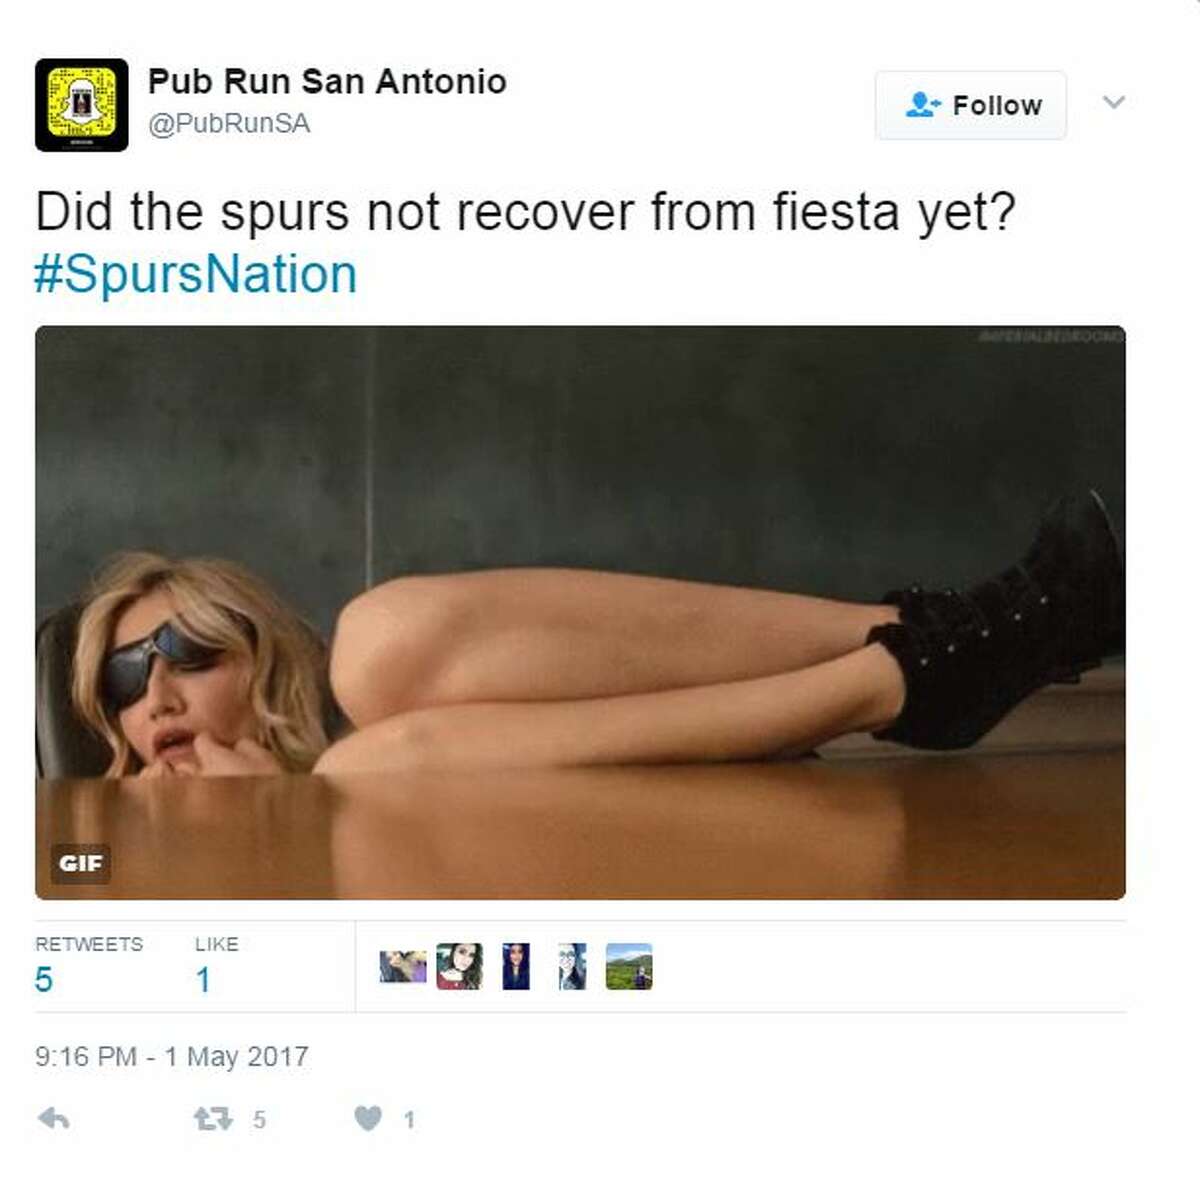 Did the spurs not recover from fiesta yet?